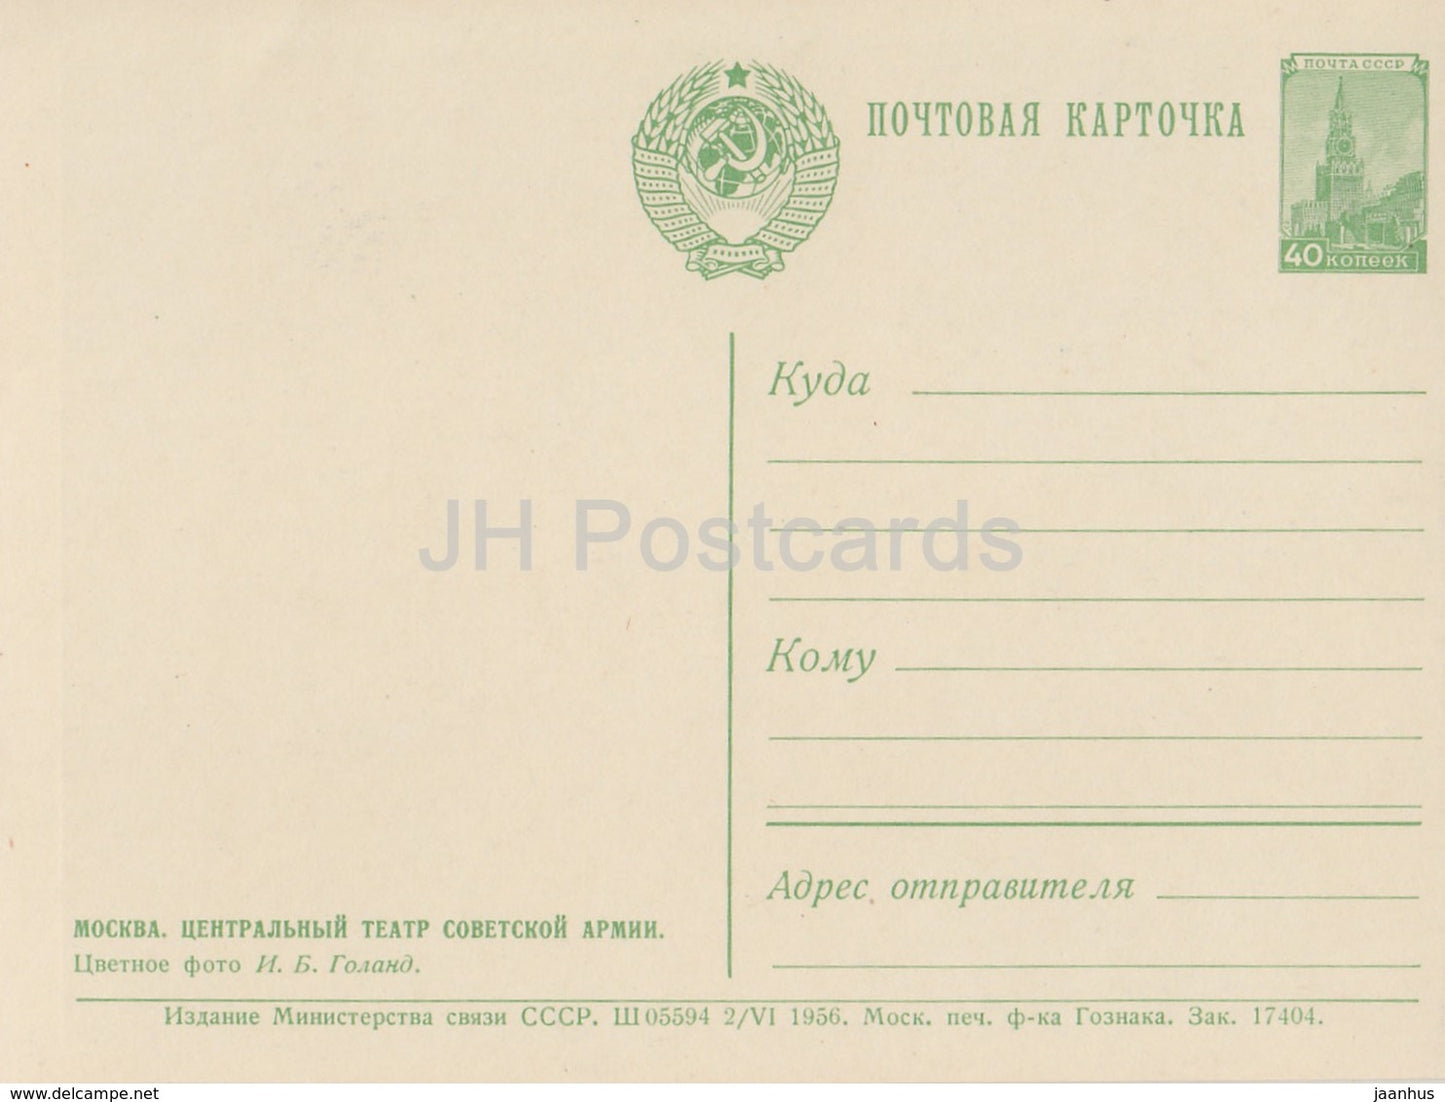 Moscow - Central Theatre of Soviet Army - bicycle - postal stationery - 1956 - Russia USSR - unused